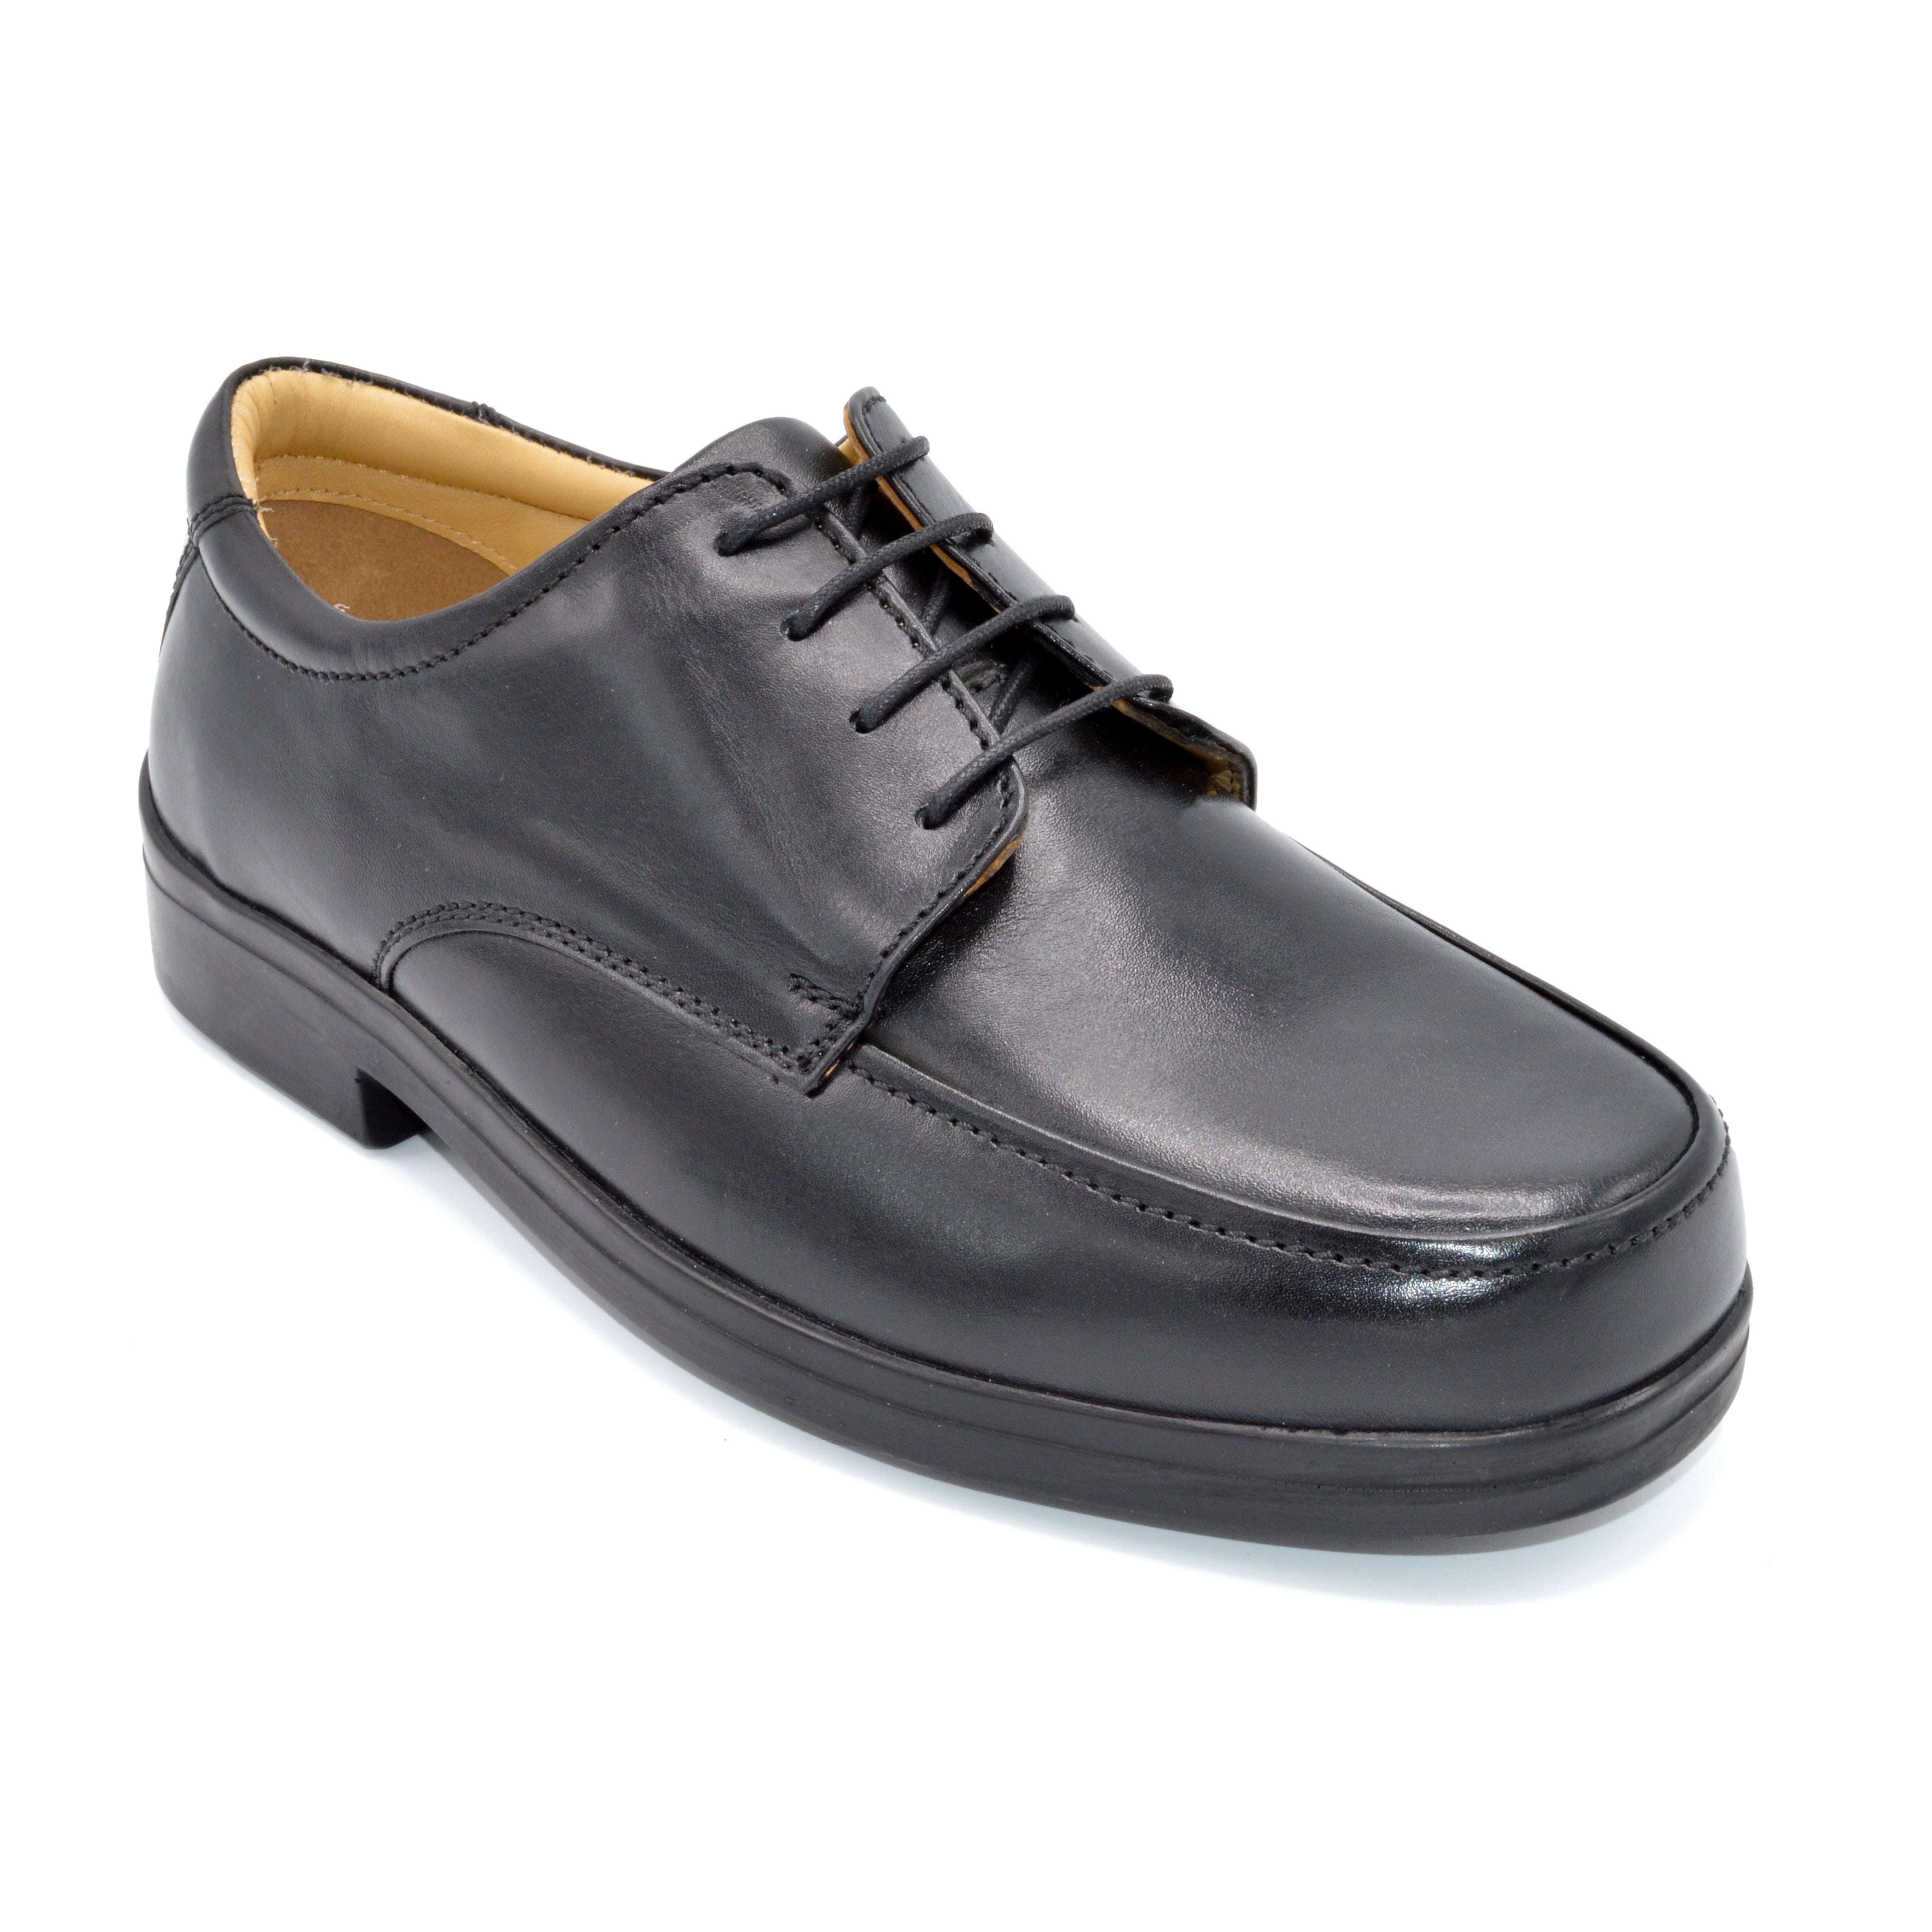 Black Mens Wide Fit Velcro Shoes For Bunions